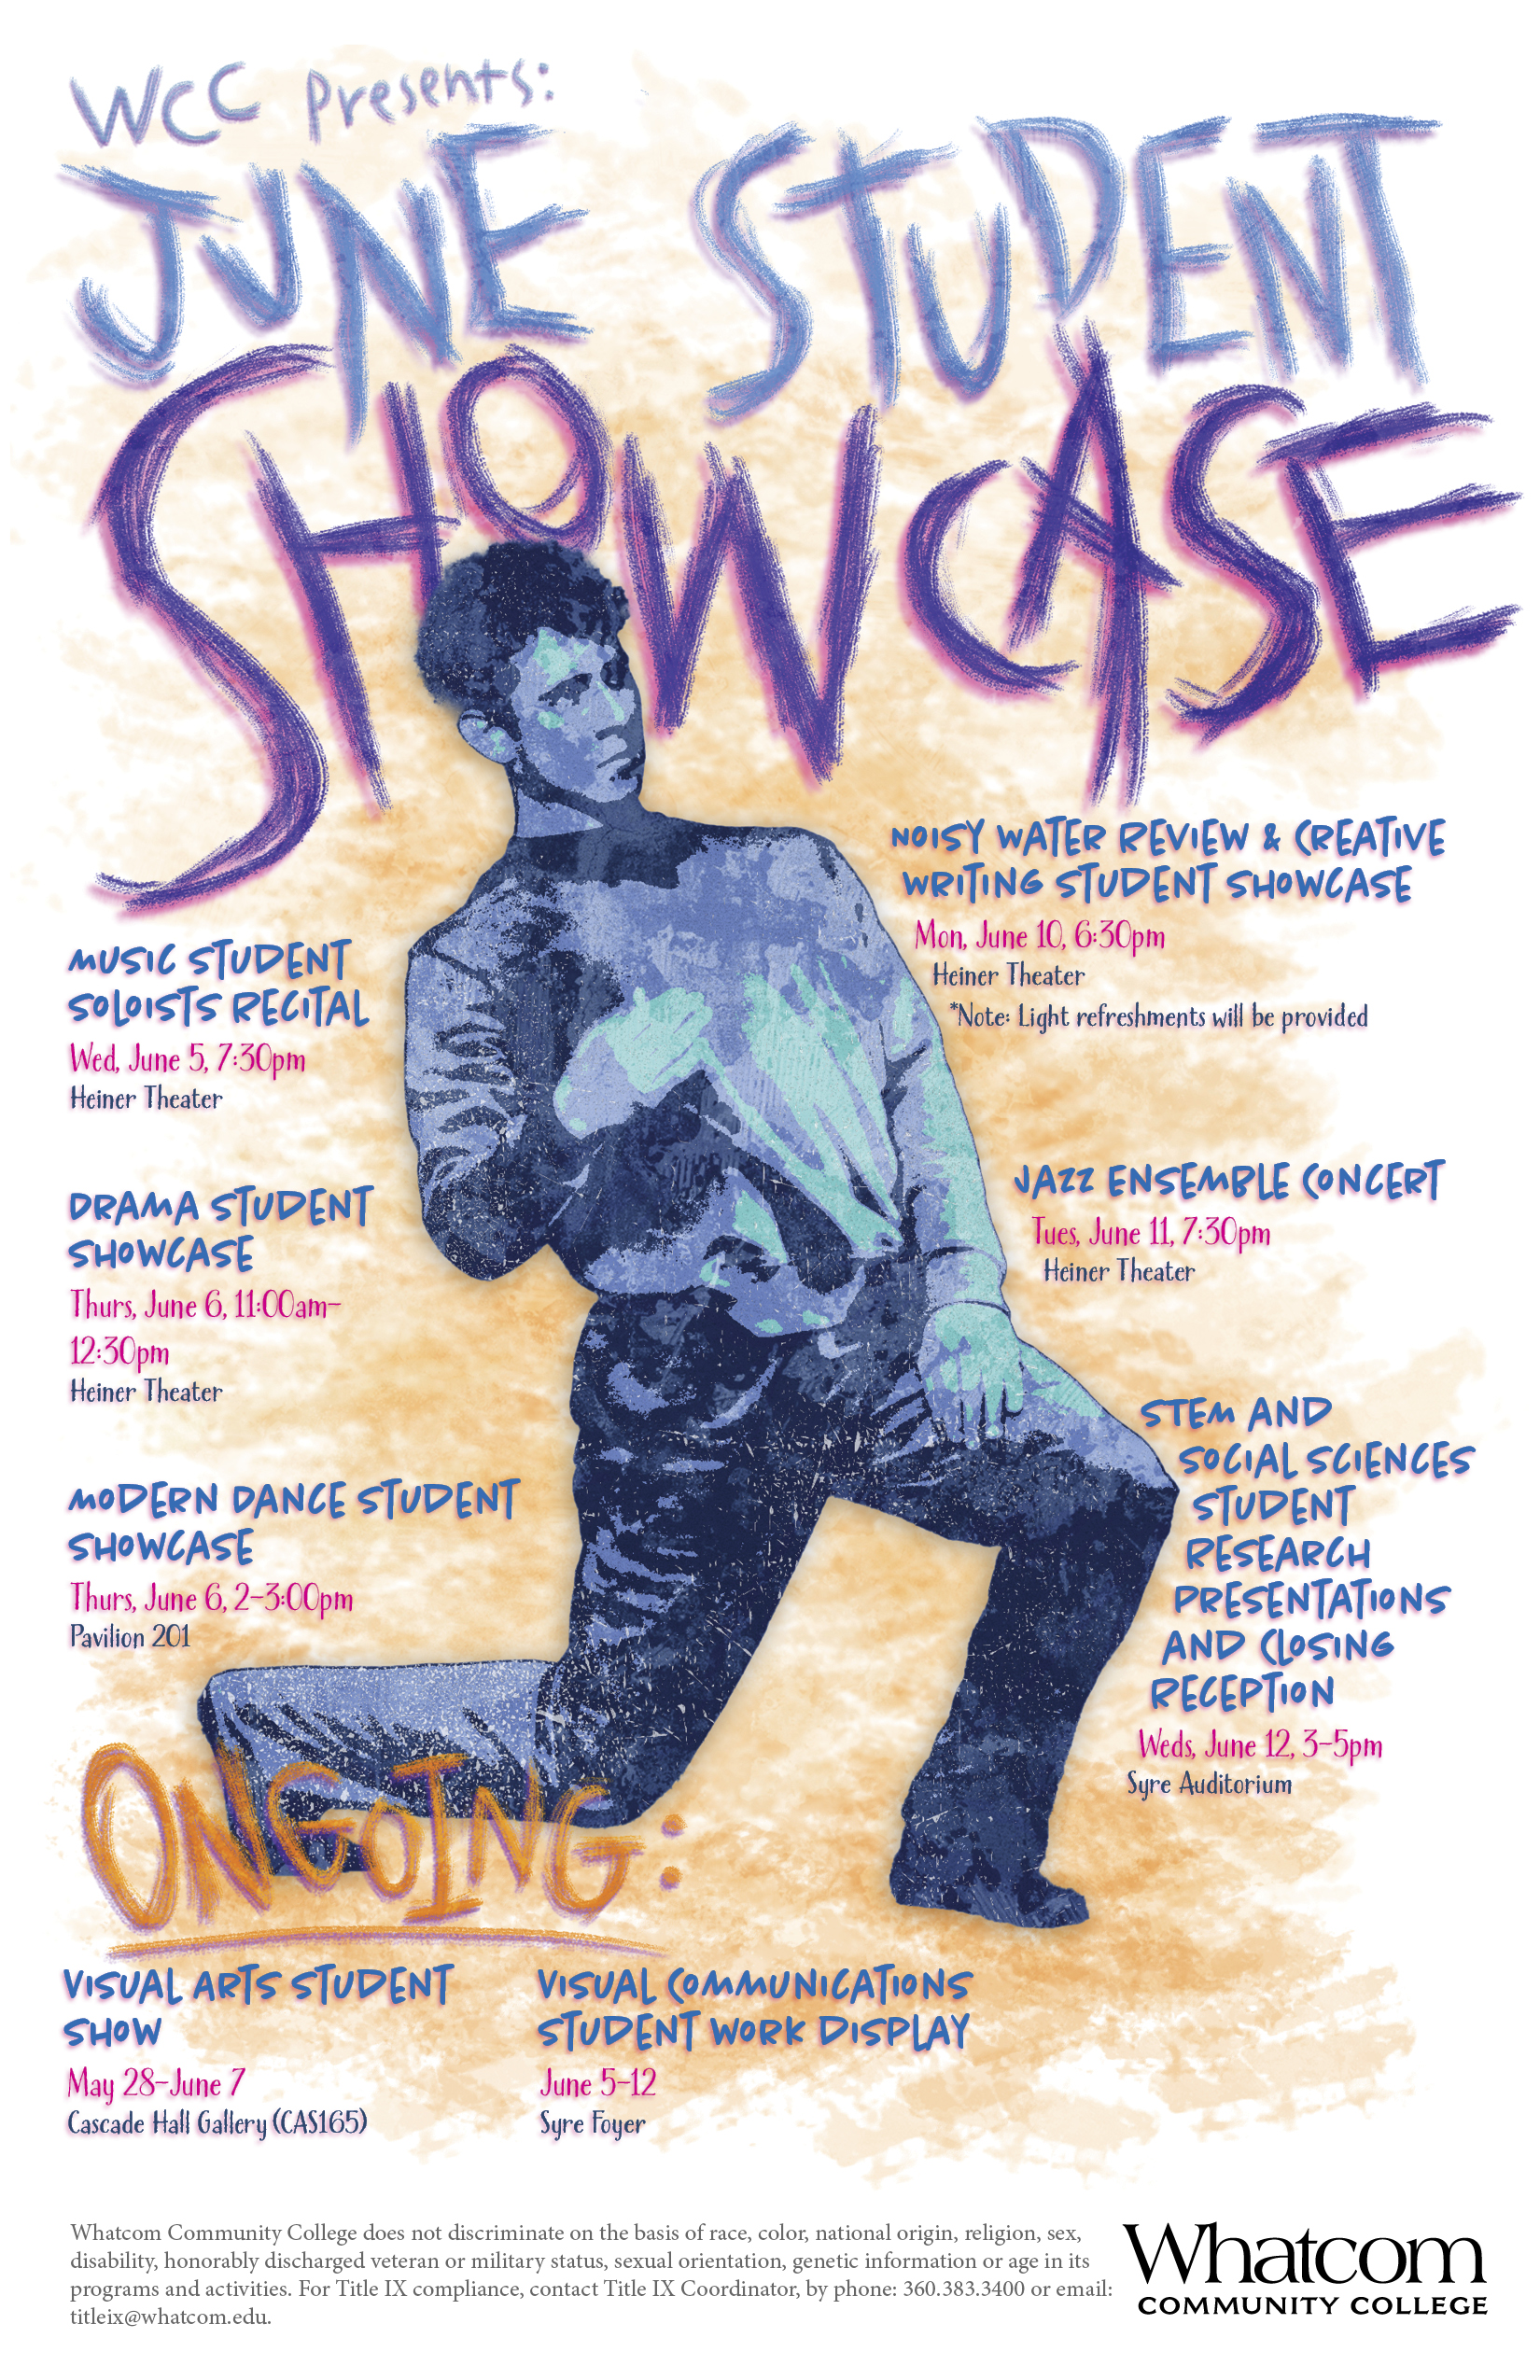 Student showcase flyer with event information